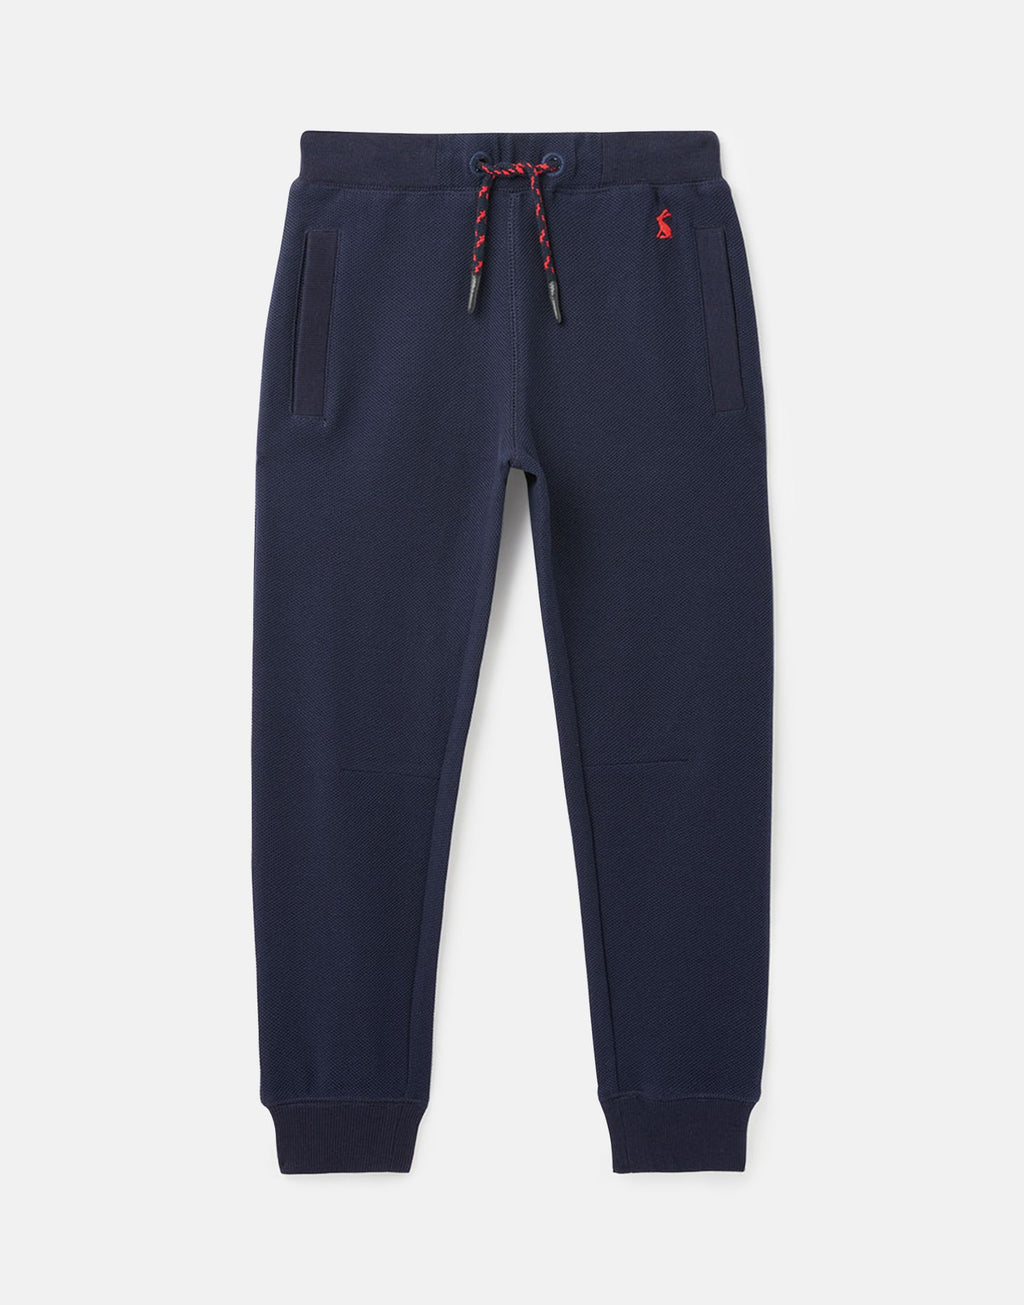 Joules Sid Pant - Navy